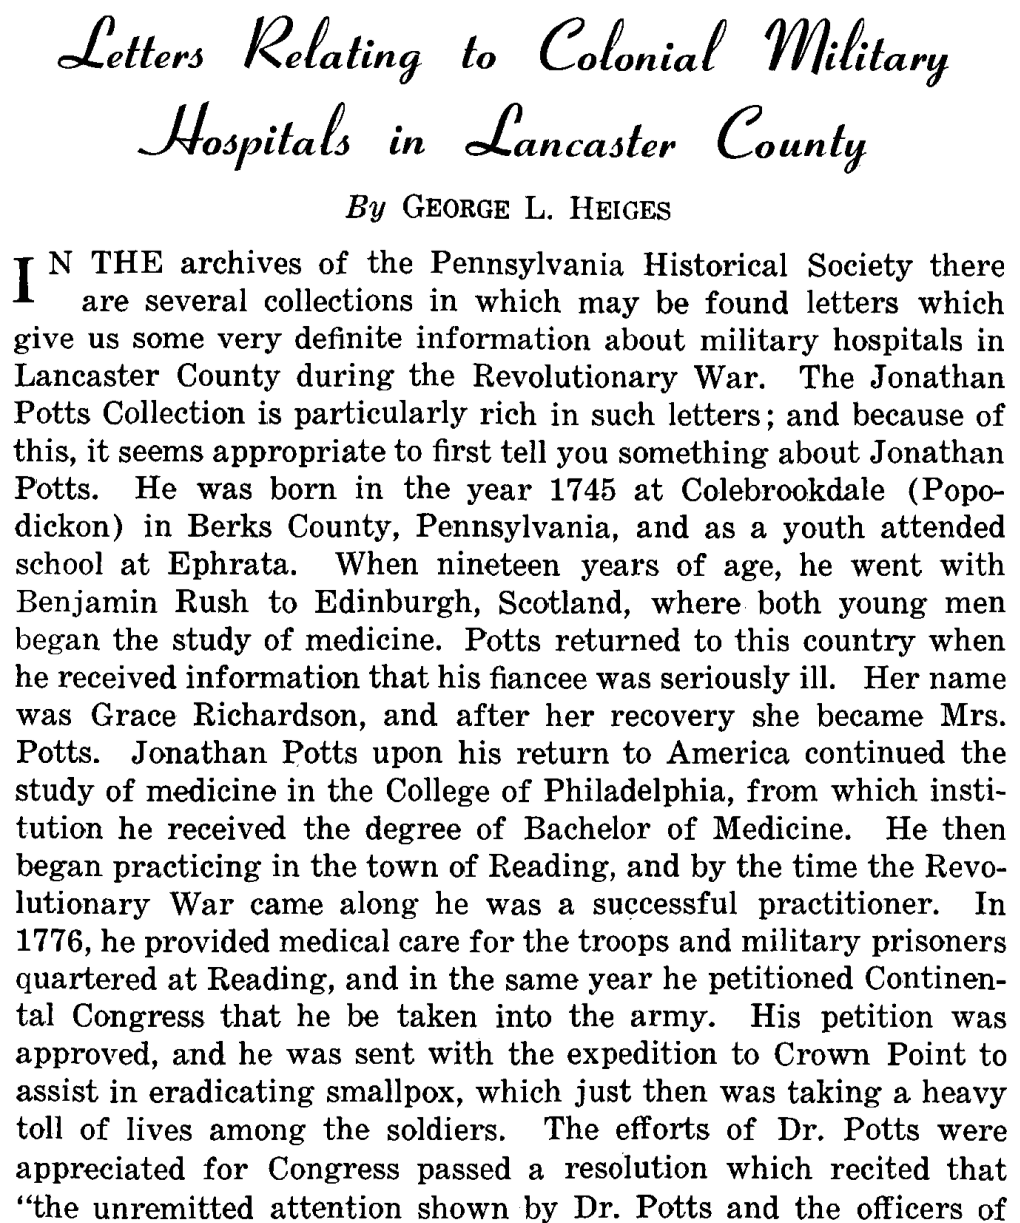 Letters Relating to Colonial Military Hospitals in Lancaster County